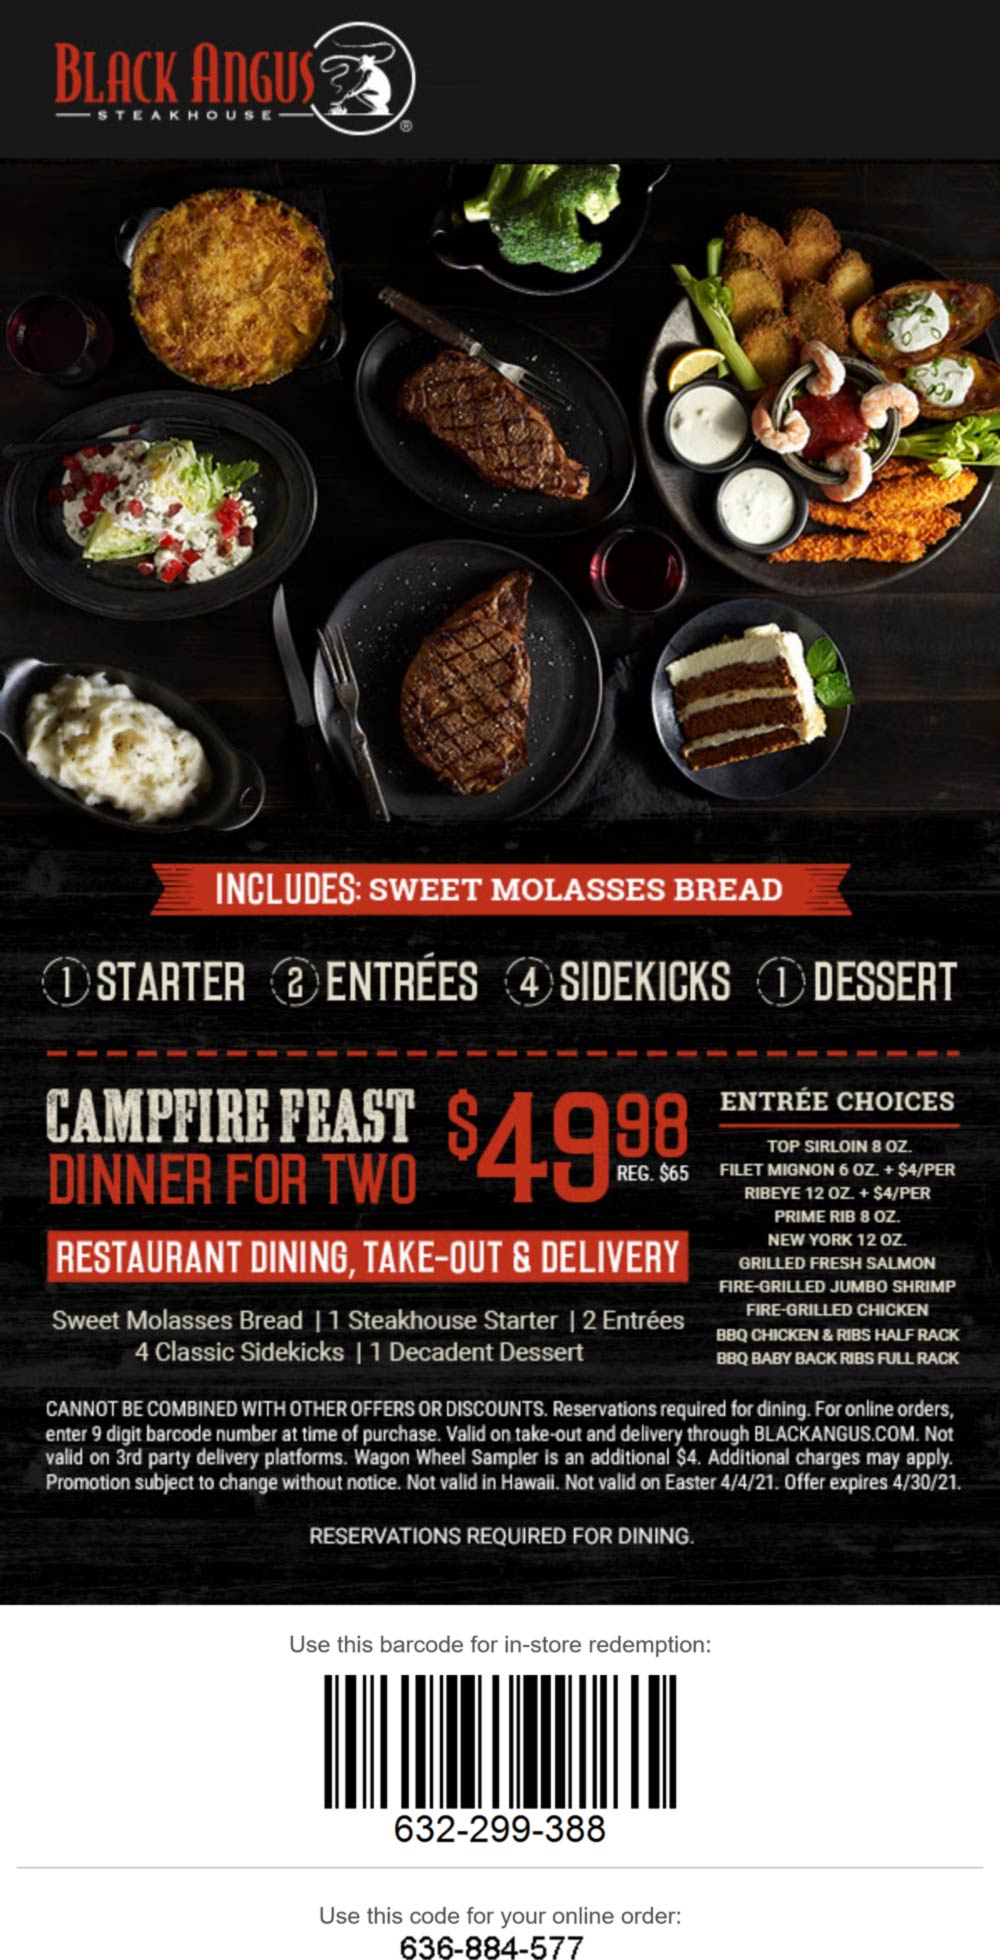 Black Angus restaurants Coupon  3 course meal for 2 = $50 at Black Angus steakhouse #blackangus 